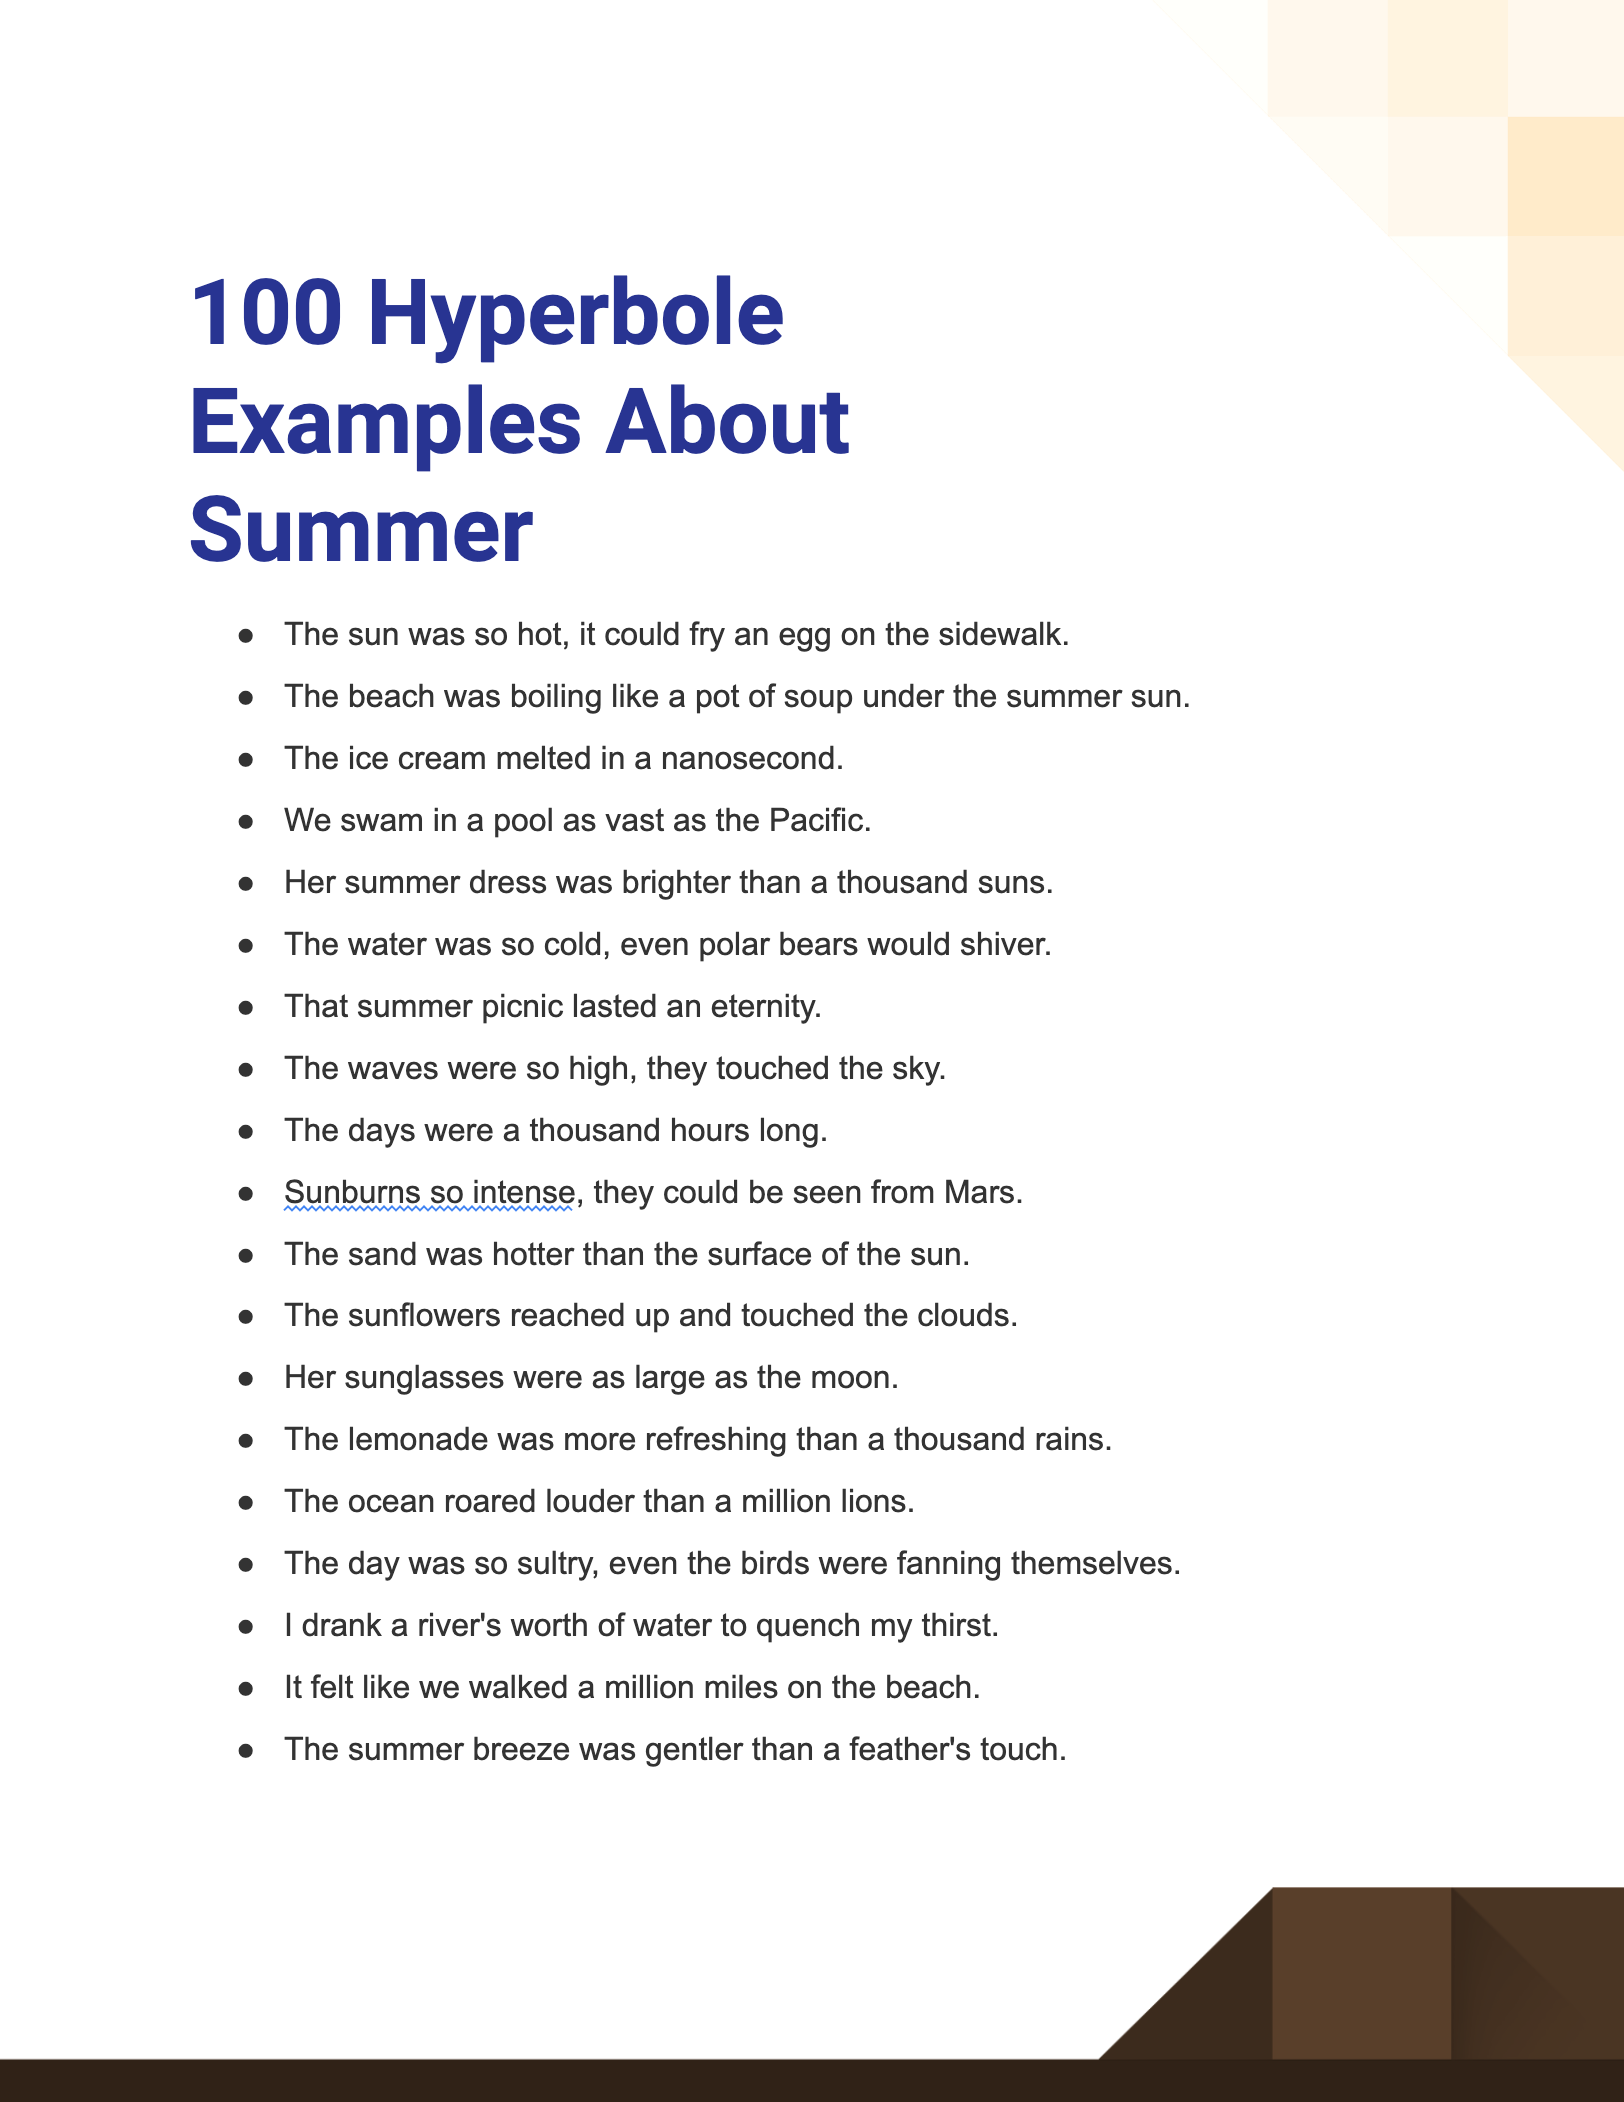 hyperbole examples about summer1